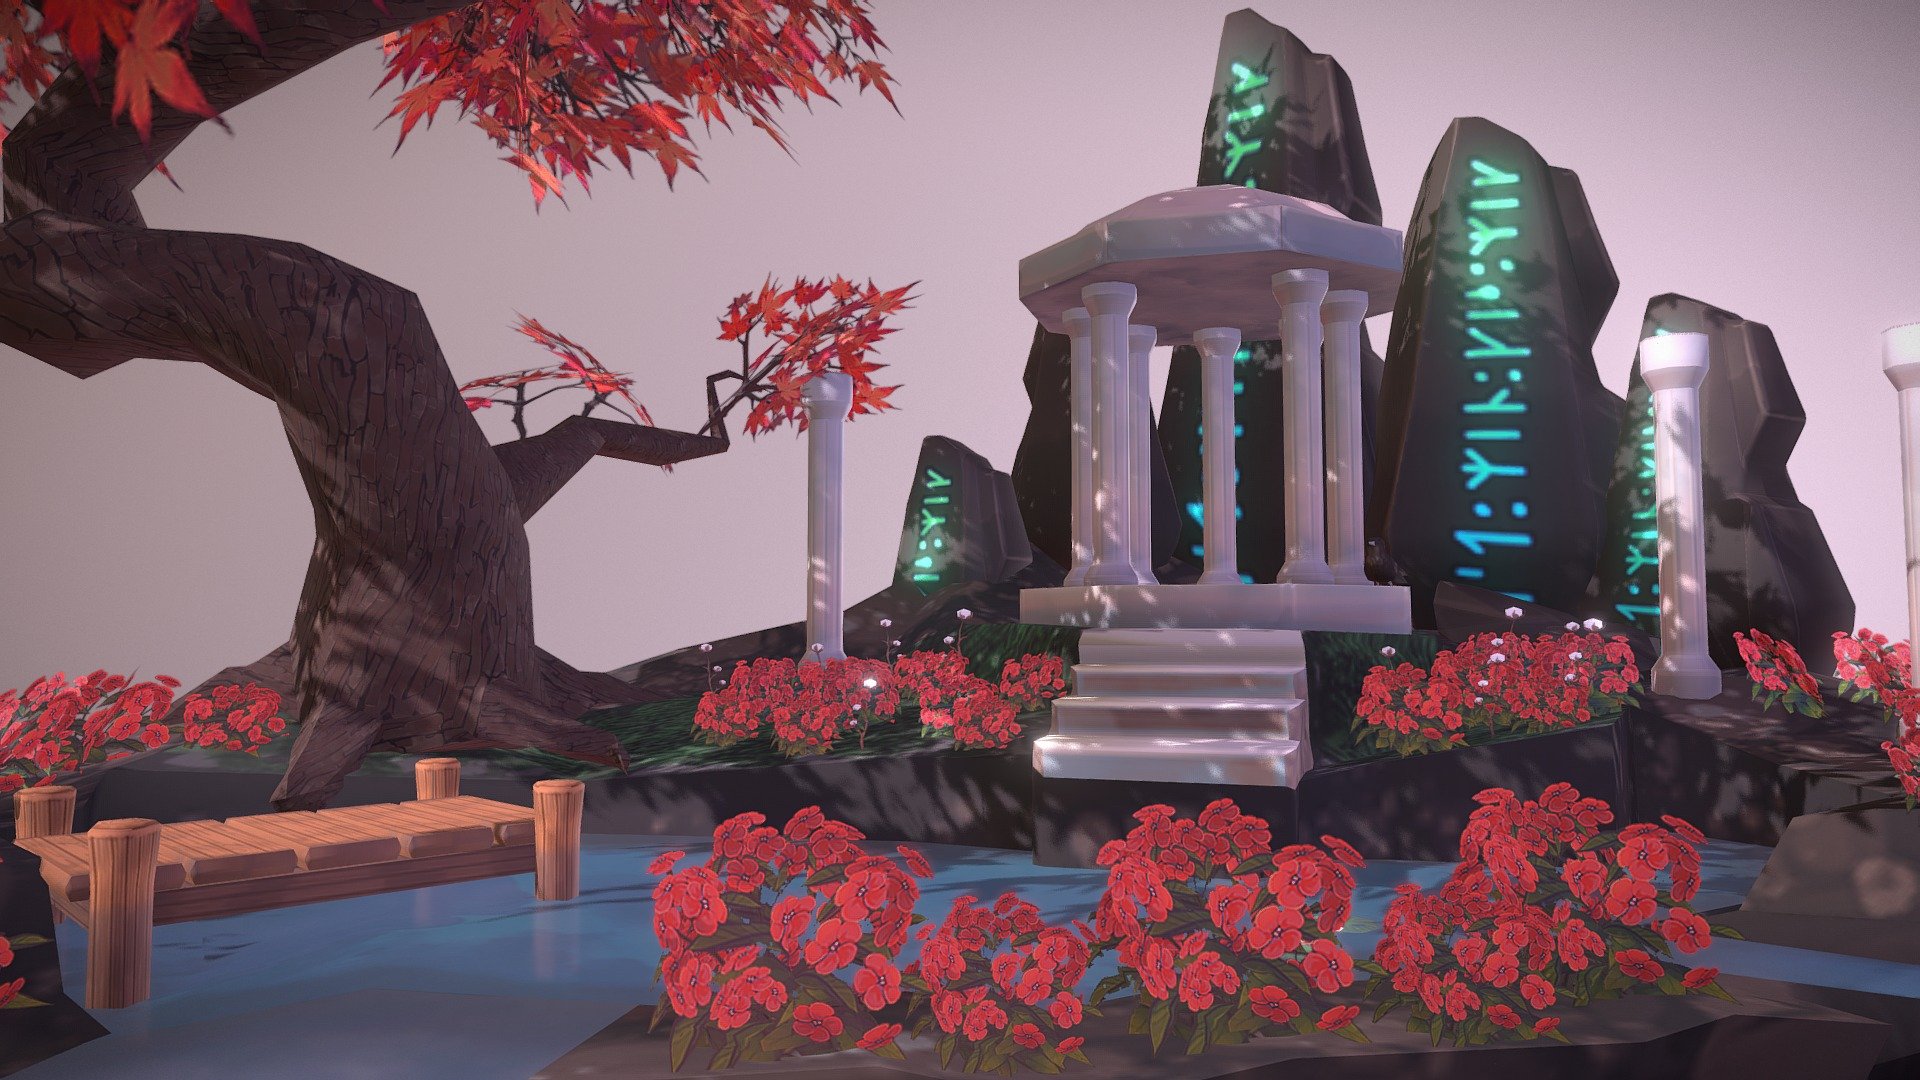 Second first year project for DMU! I wanted to try animating the water but quickly found out that it wouldn't work with the alphas put in place haha. The runes on the rocks say &lsquo;ost:min:kis:mik': &lsquo;my love, kiss me' to keep with the romantic setting! - Aqueduct Diorama - 3D model by Emmett Green (@emmettgreen) 3d model